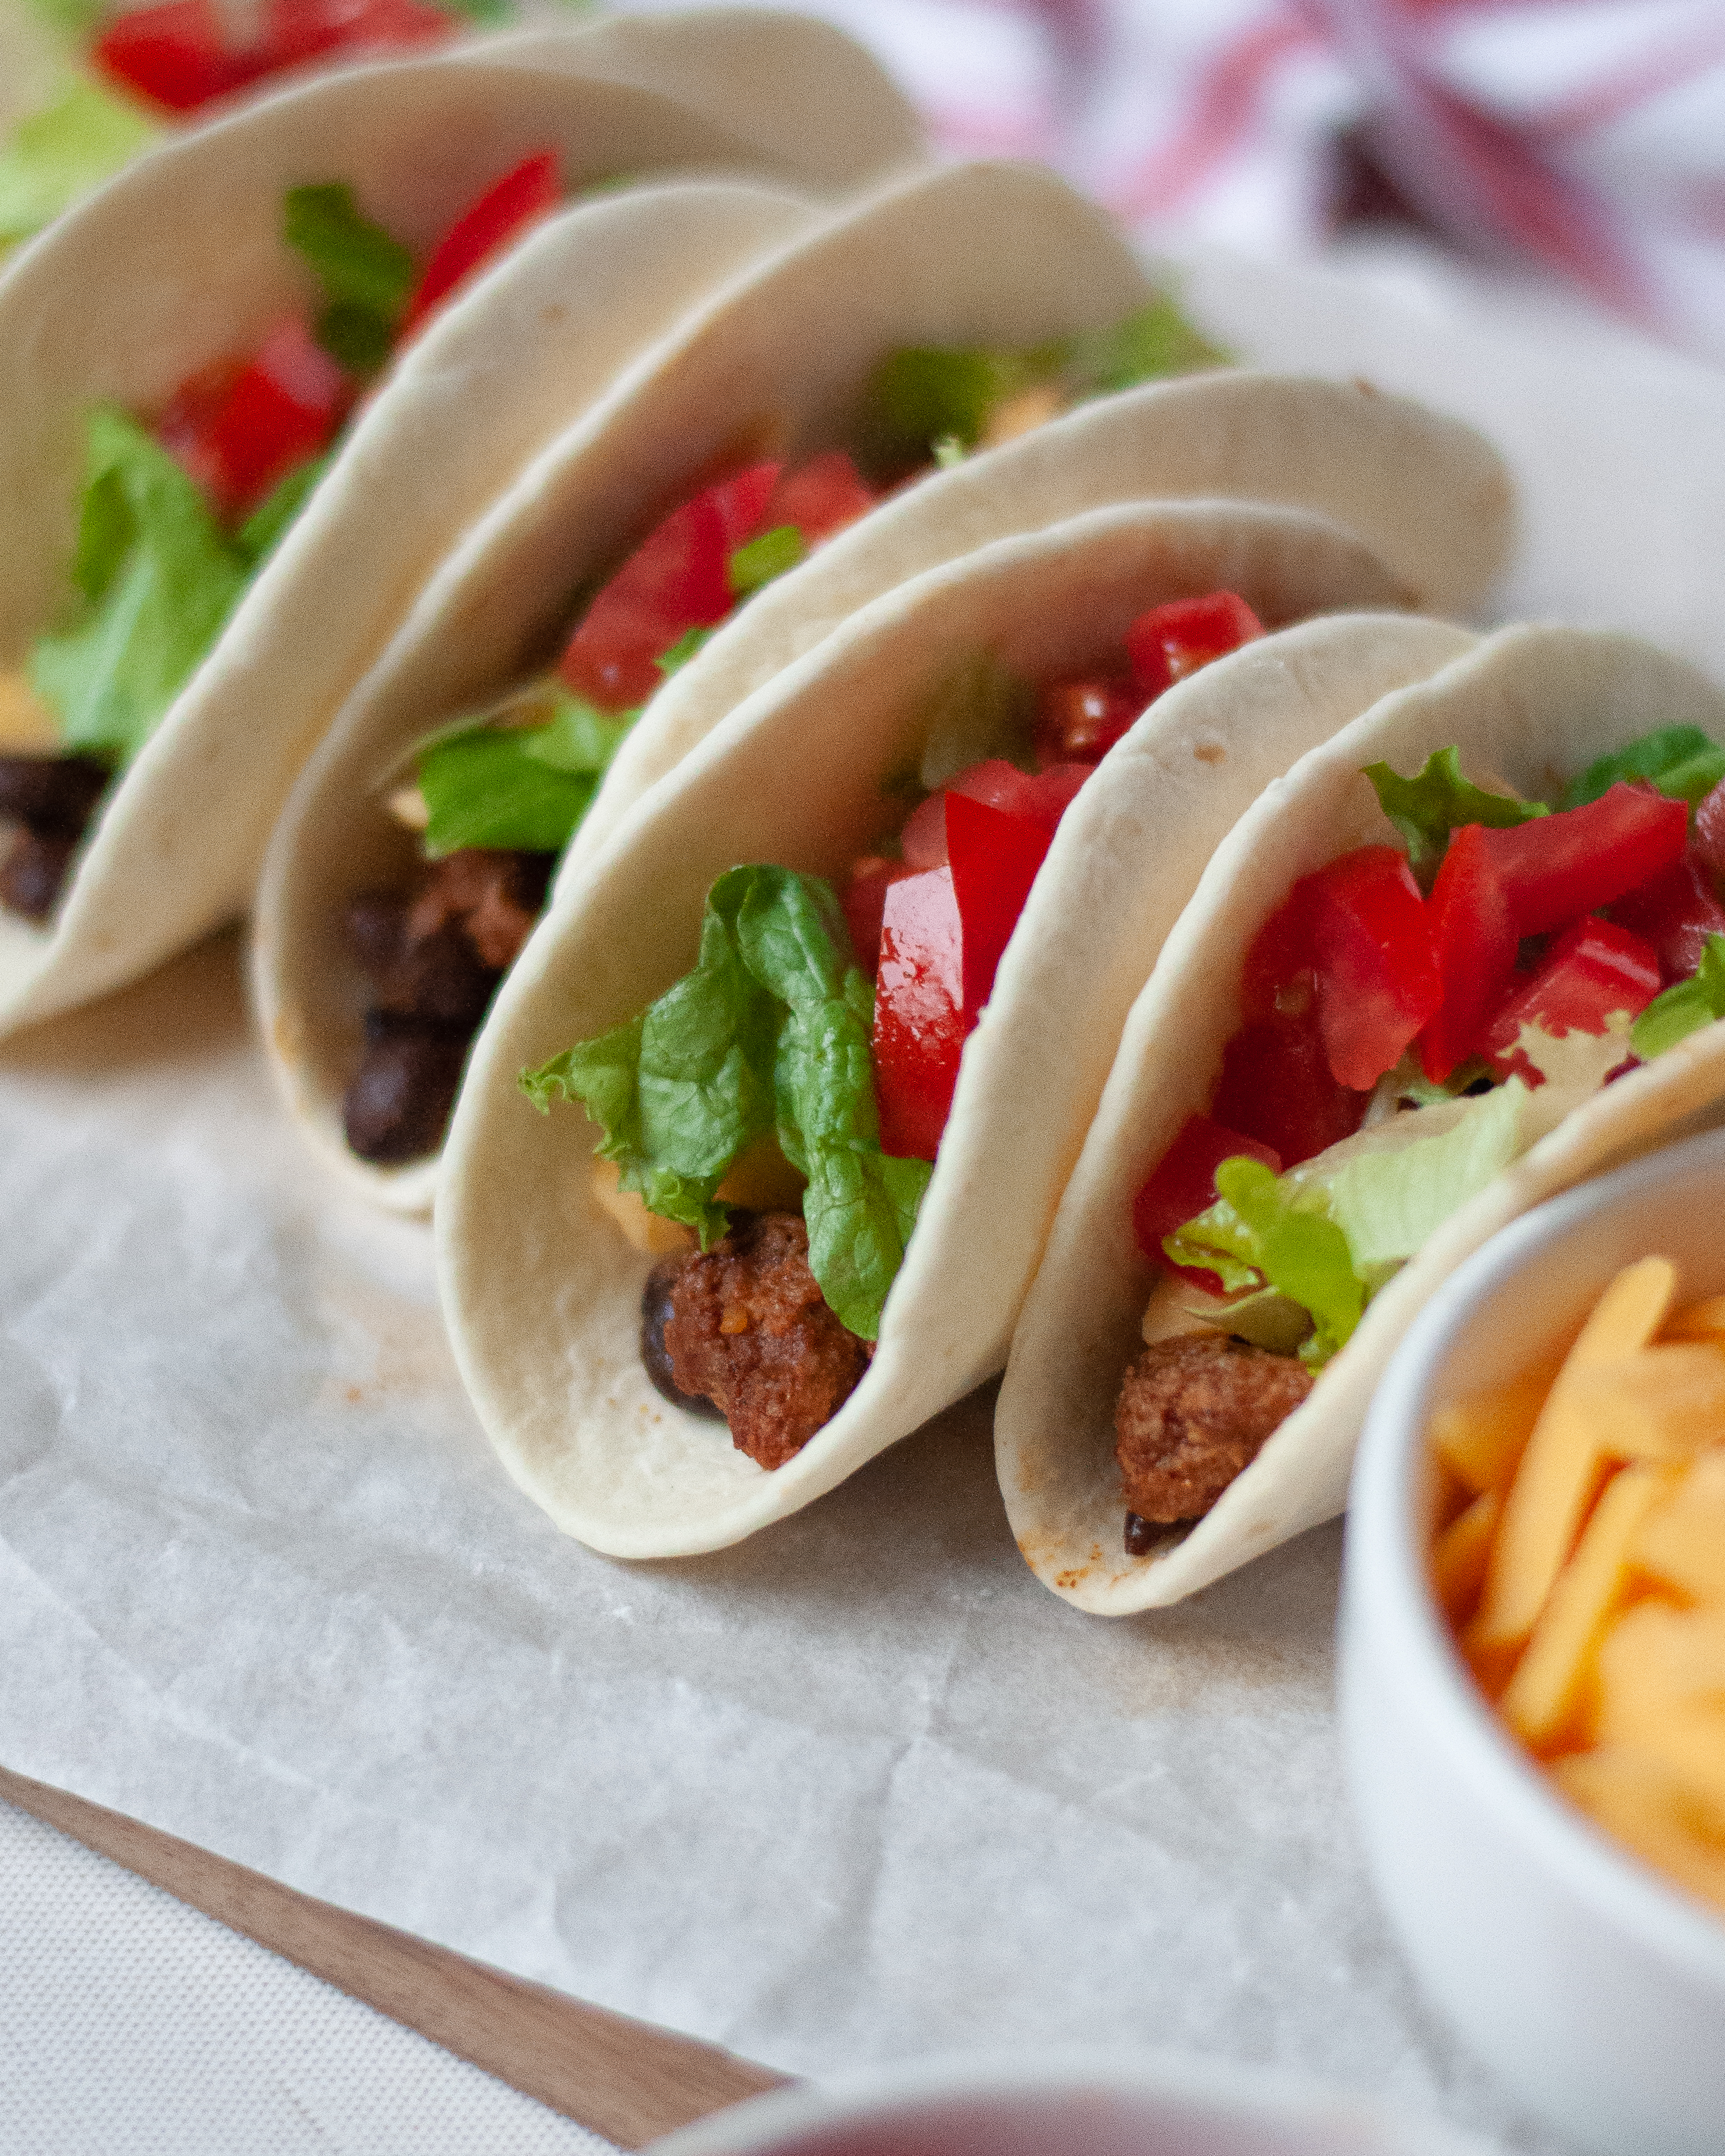 Close up of a tray of turkey tacos with black beans served on tortillas with shredded lettuce, cheese, and tomatoes.